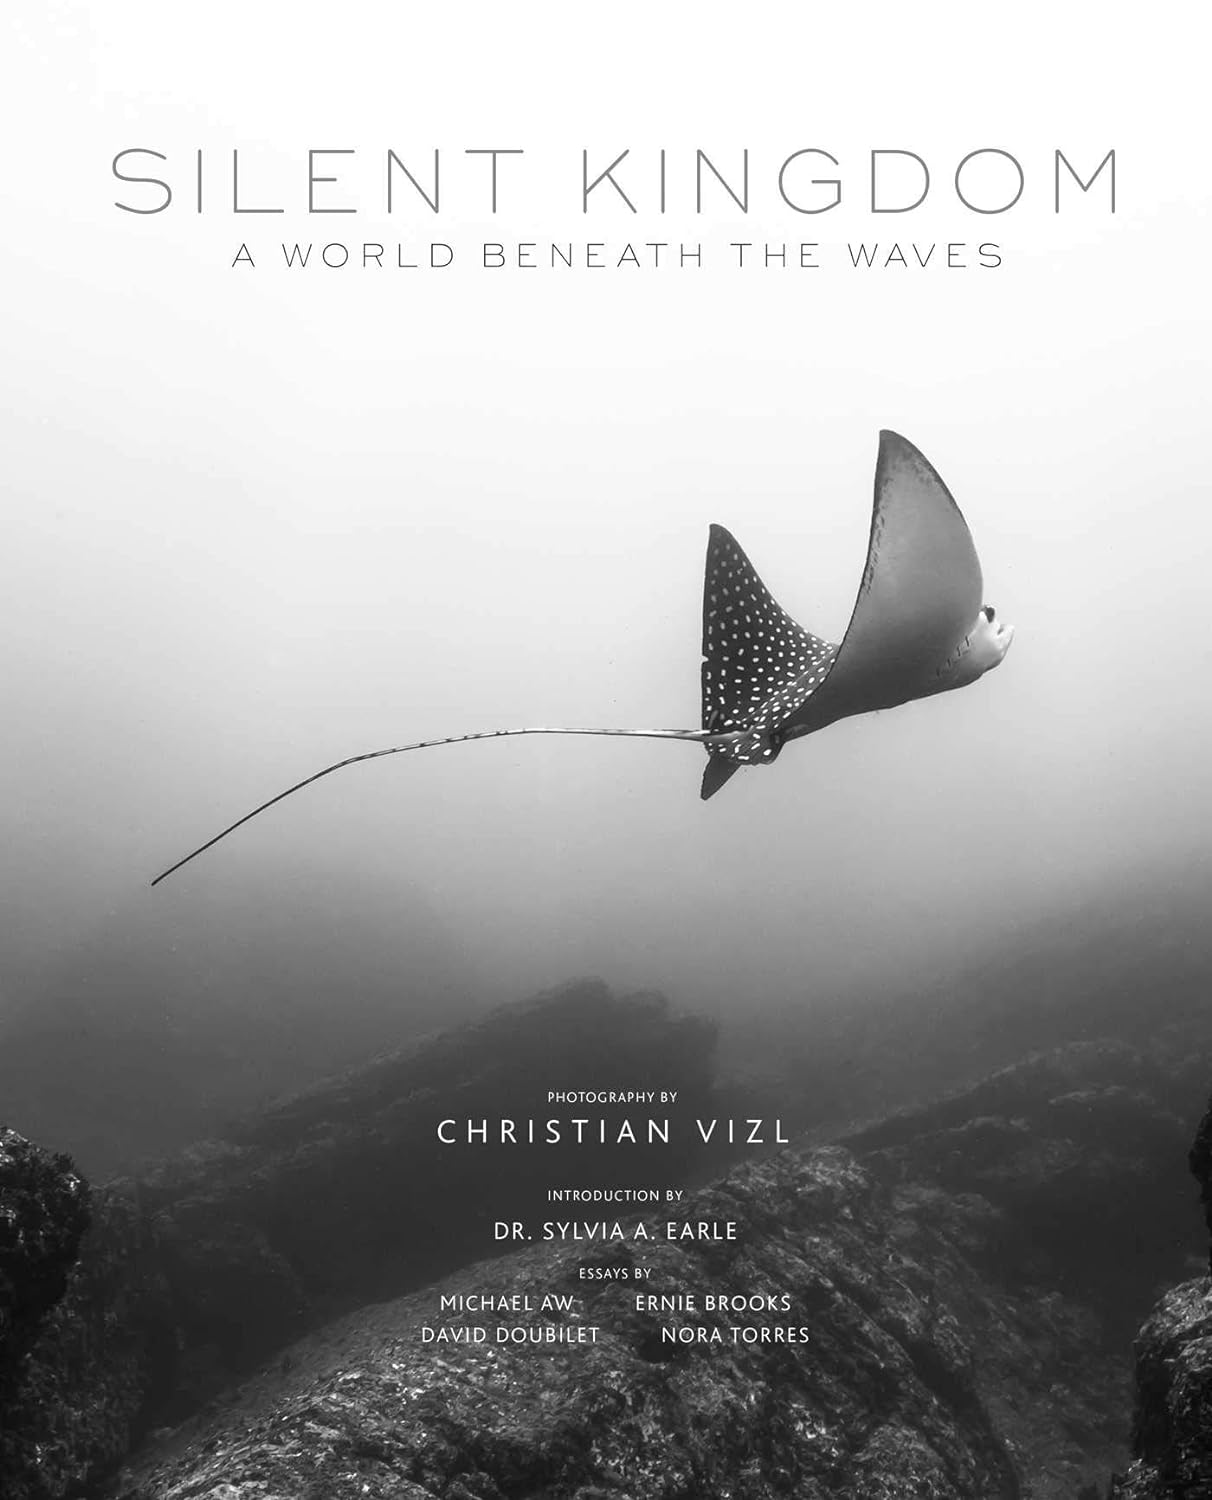 Silent Kingdom: A World Beneath the Waves     Hardcover – May 14, 2019